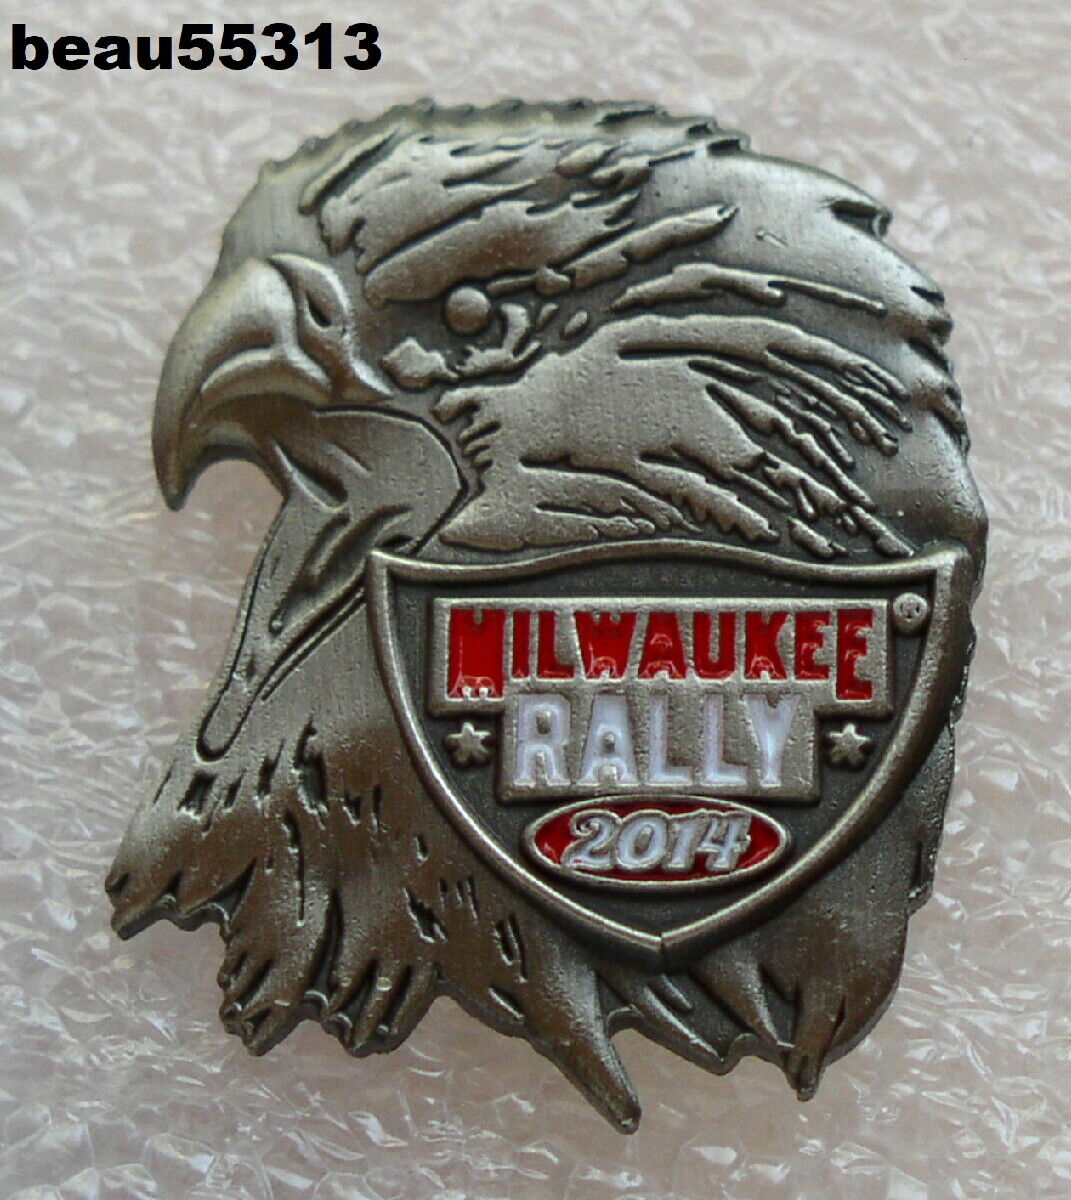 ⭐2014 MILWAUKEE WISCONSIN HARLEY RALLY COLLECTIBLE VEST JACKET HAT PIN